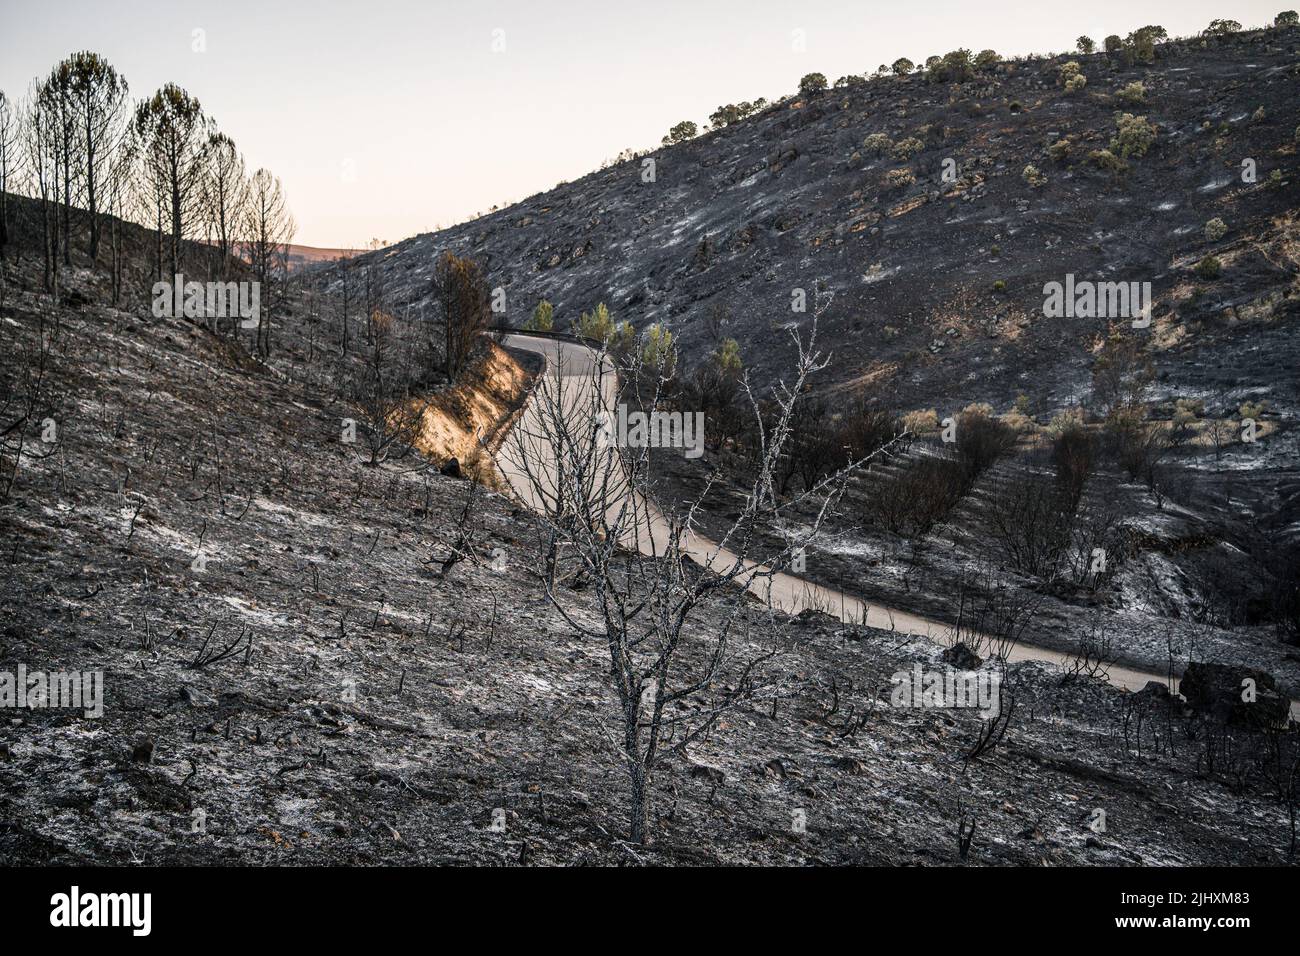 The slopes of the road that leads to Valdepeñas de la Sierra destroyed by the flames of the fire. The Red Cross shelter in the town of Uceda, next to Valdepeñas de la Sierra, welcomed more than 150 people from the towns affected by the fire. The forest fire that lasted more than 48 hours in Valdepeñas de la Sierra, 80 kilometers from Madrid, Spain, destroyed more than 3,000 hectares. The authorities suspect that the fire could have been caused by a pyromaniac during the days of high heat temperatures recorded in Spain. Stock Photo